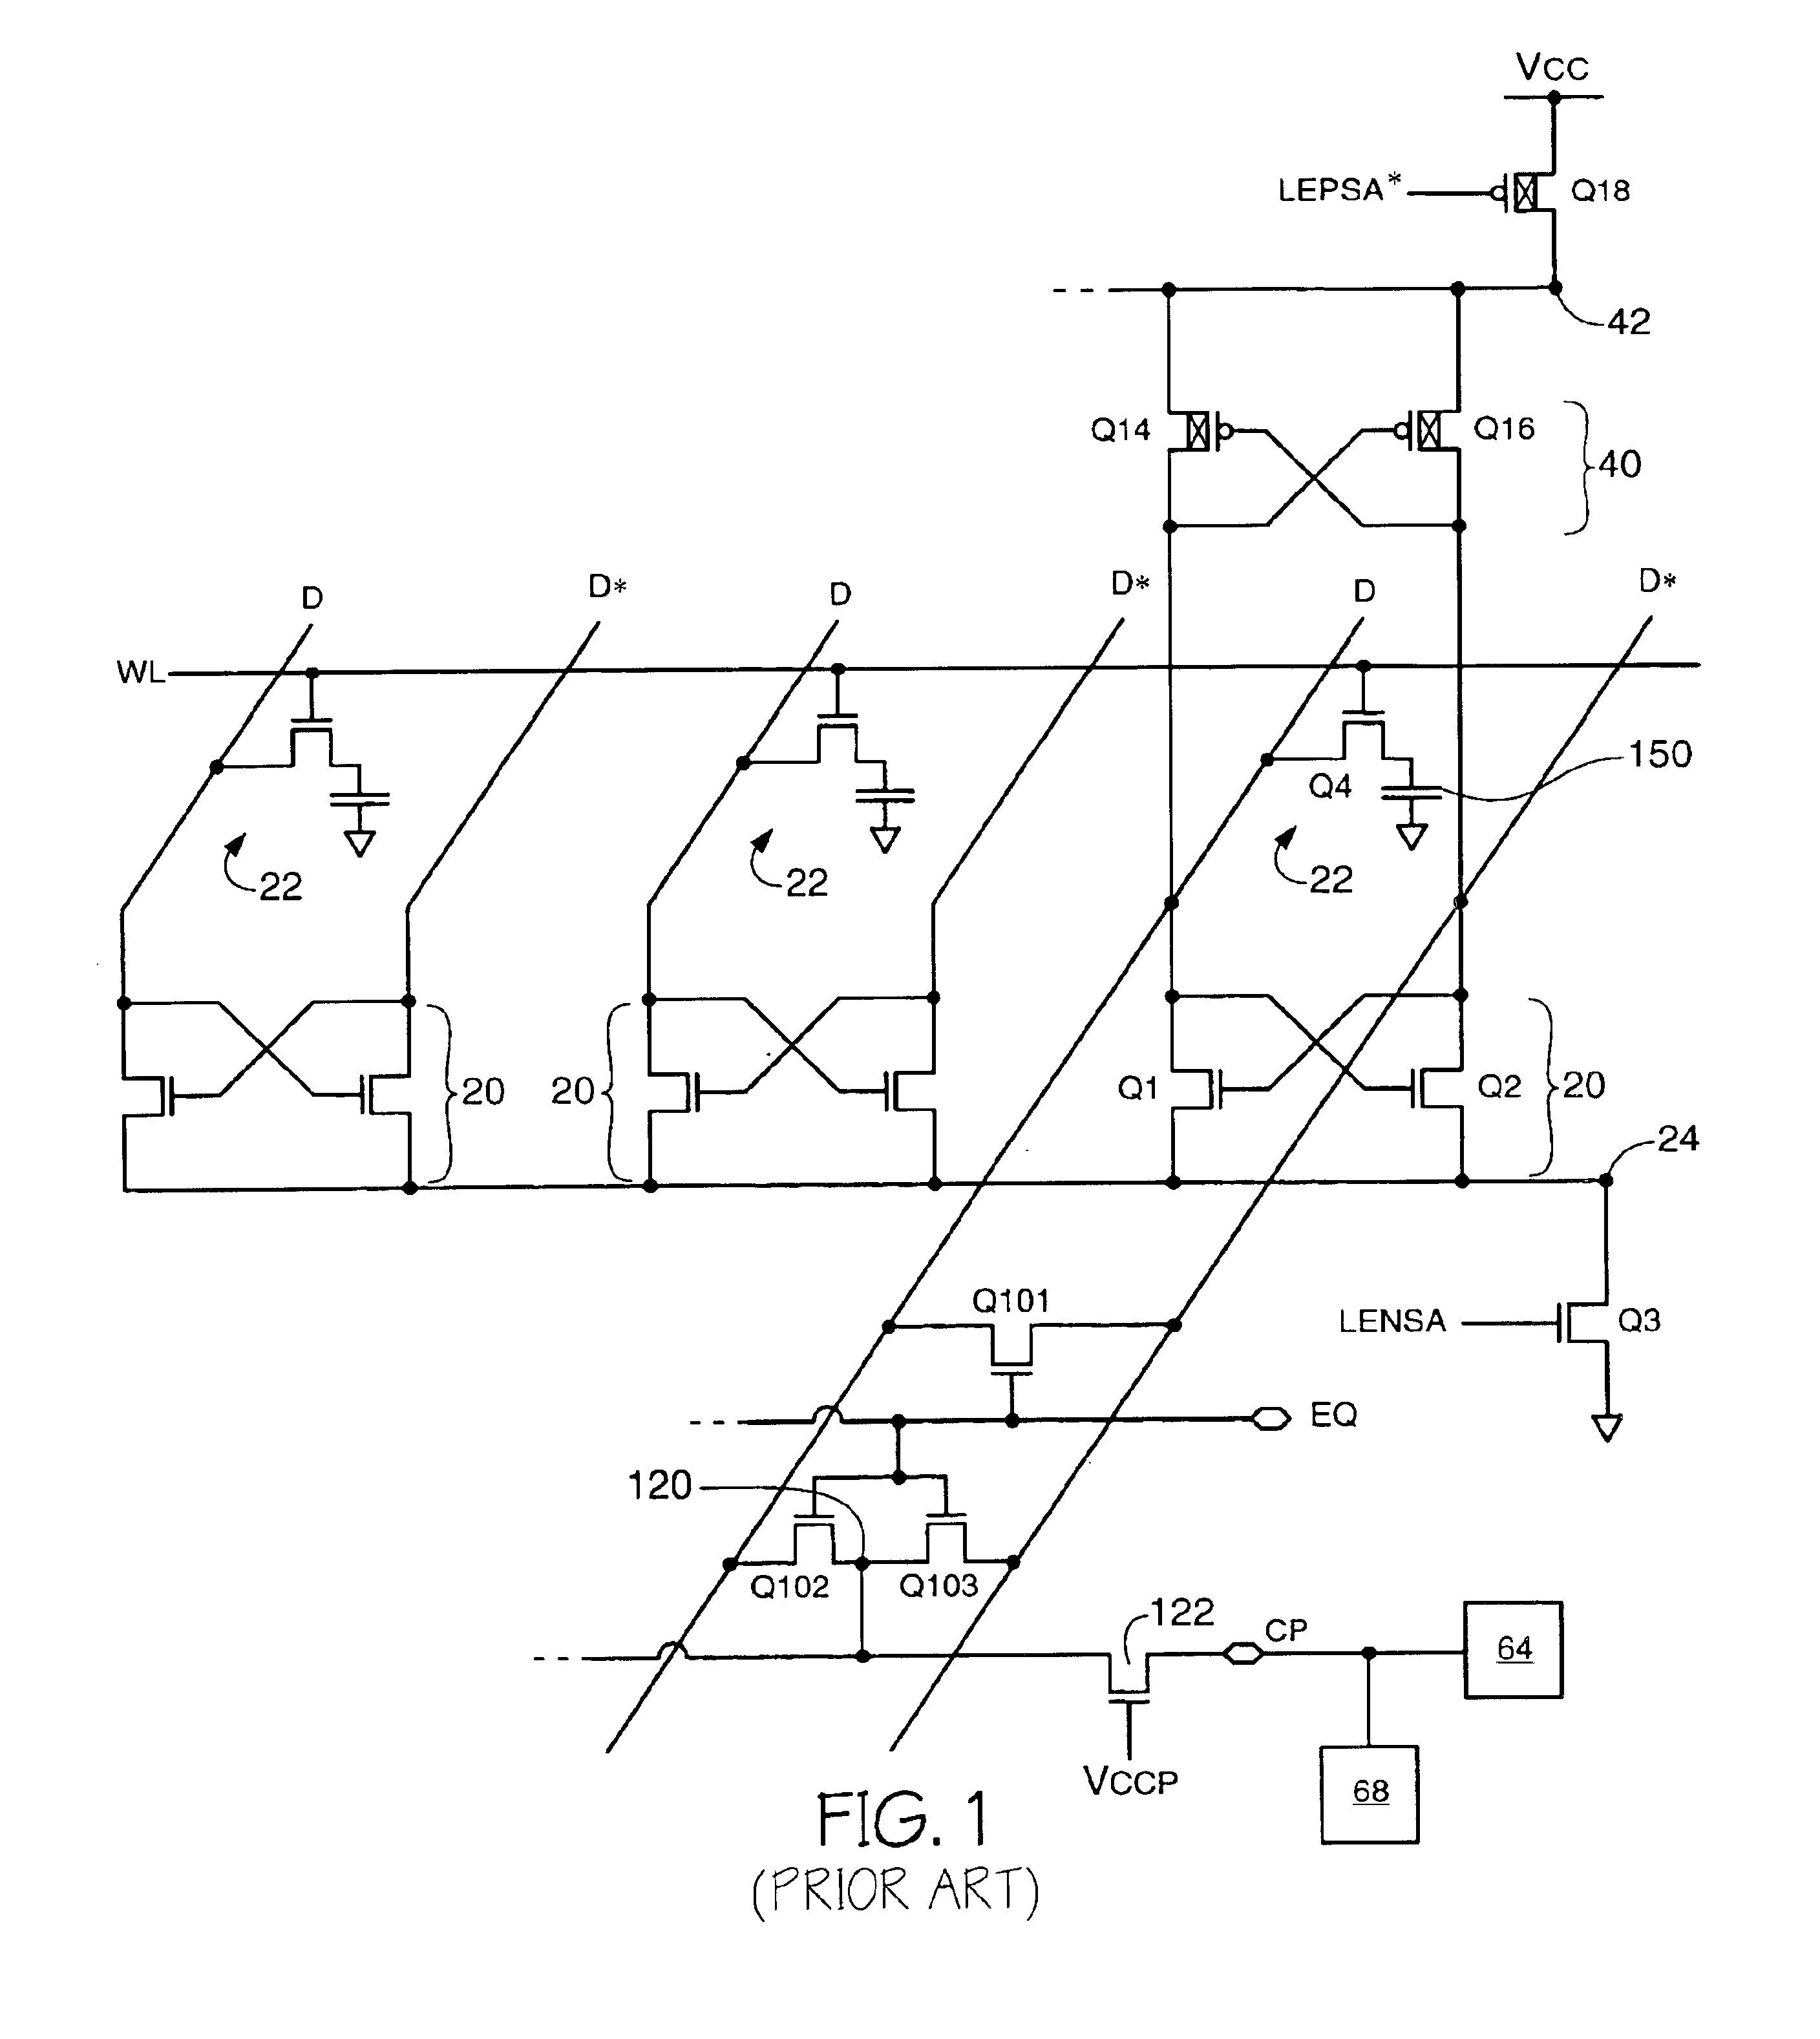 Method of preparing to test a capacitor